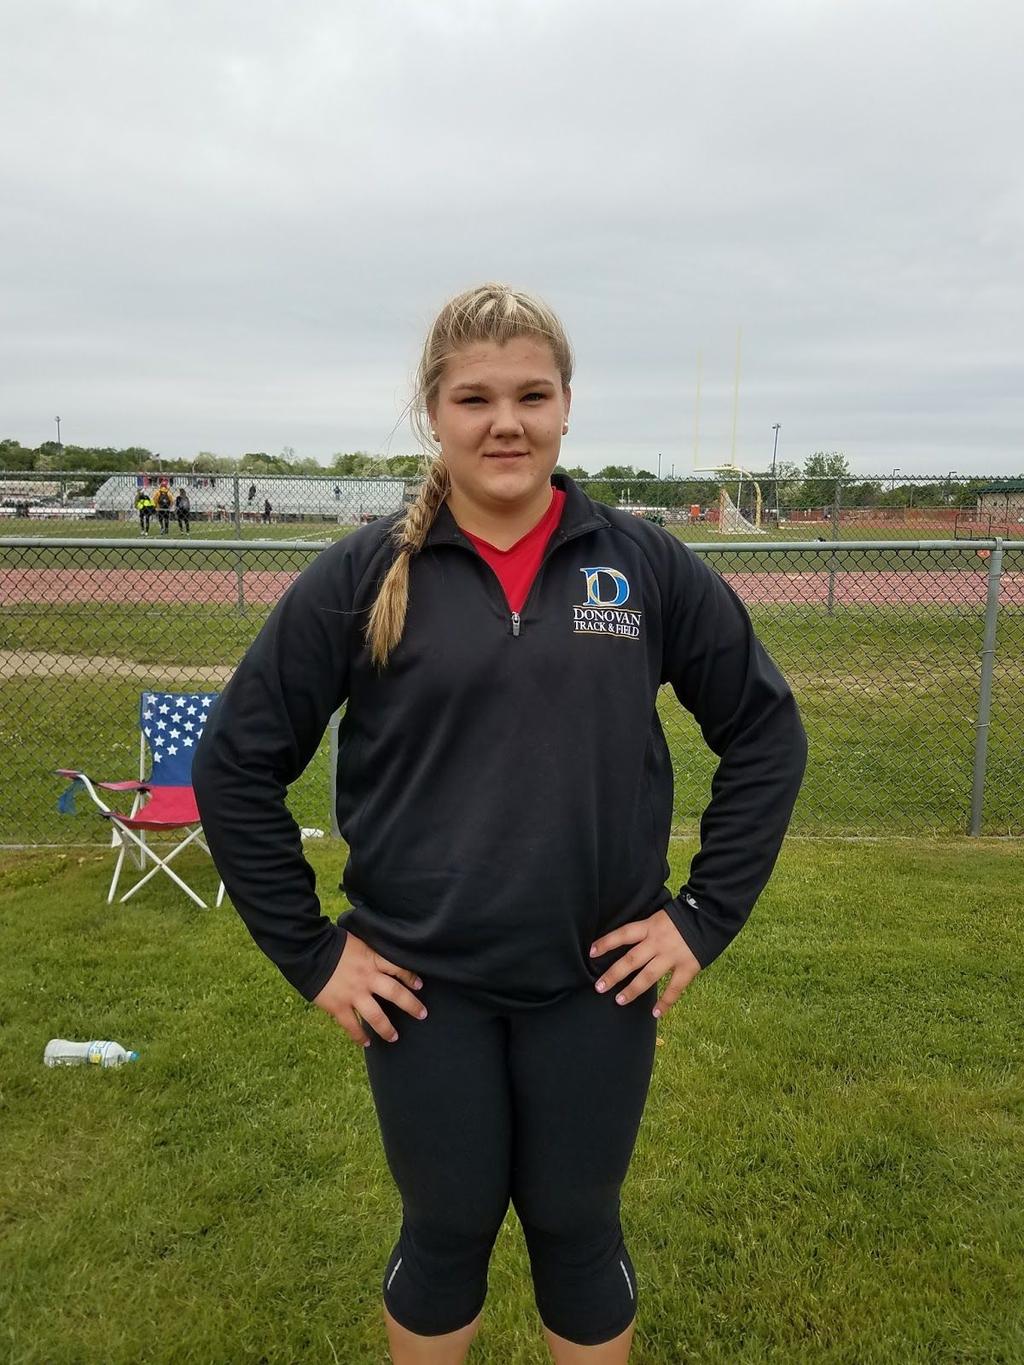 Alyssa also broke the Shore Conference Championship record in both events. Katherine Ullmann continued her stellar senior season with a second place finish in the high jump.